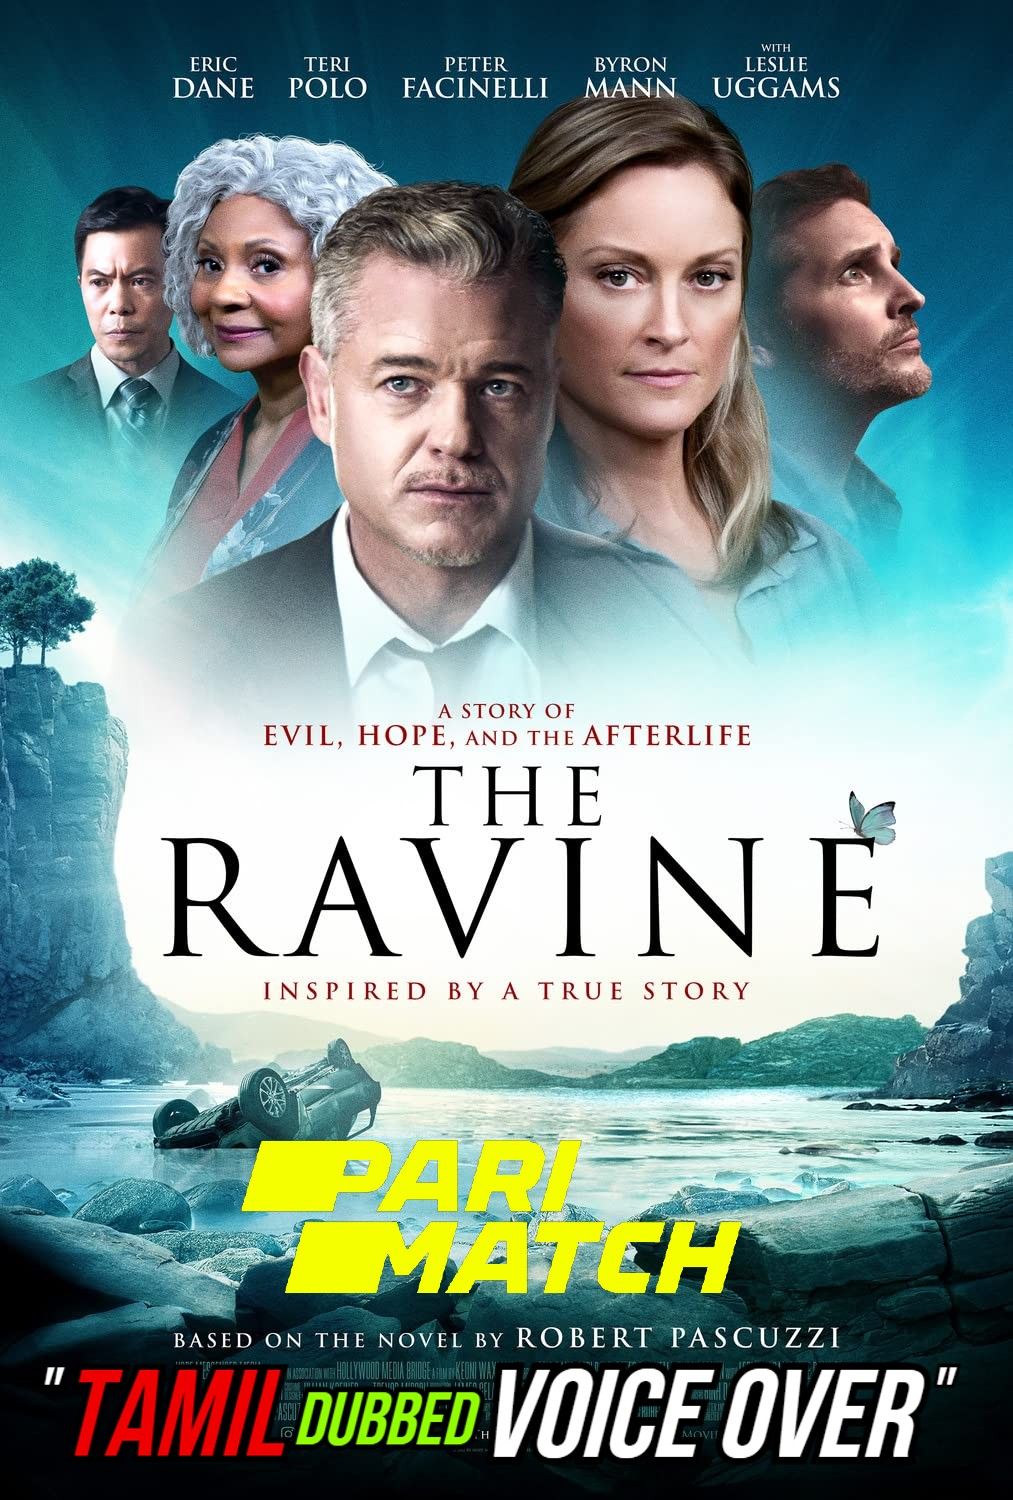 The Ravine (2021) Tamil (Voice Over) Dubbed WEBRip download full movie